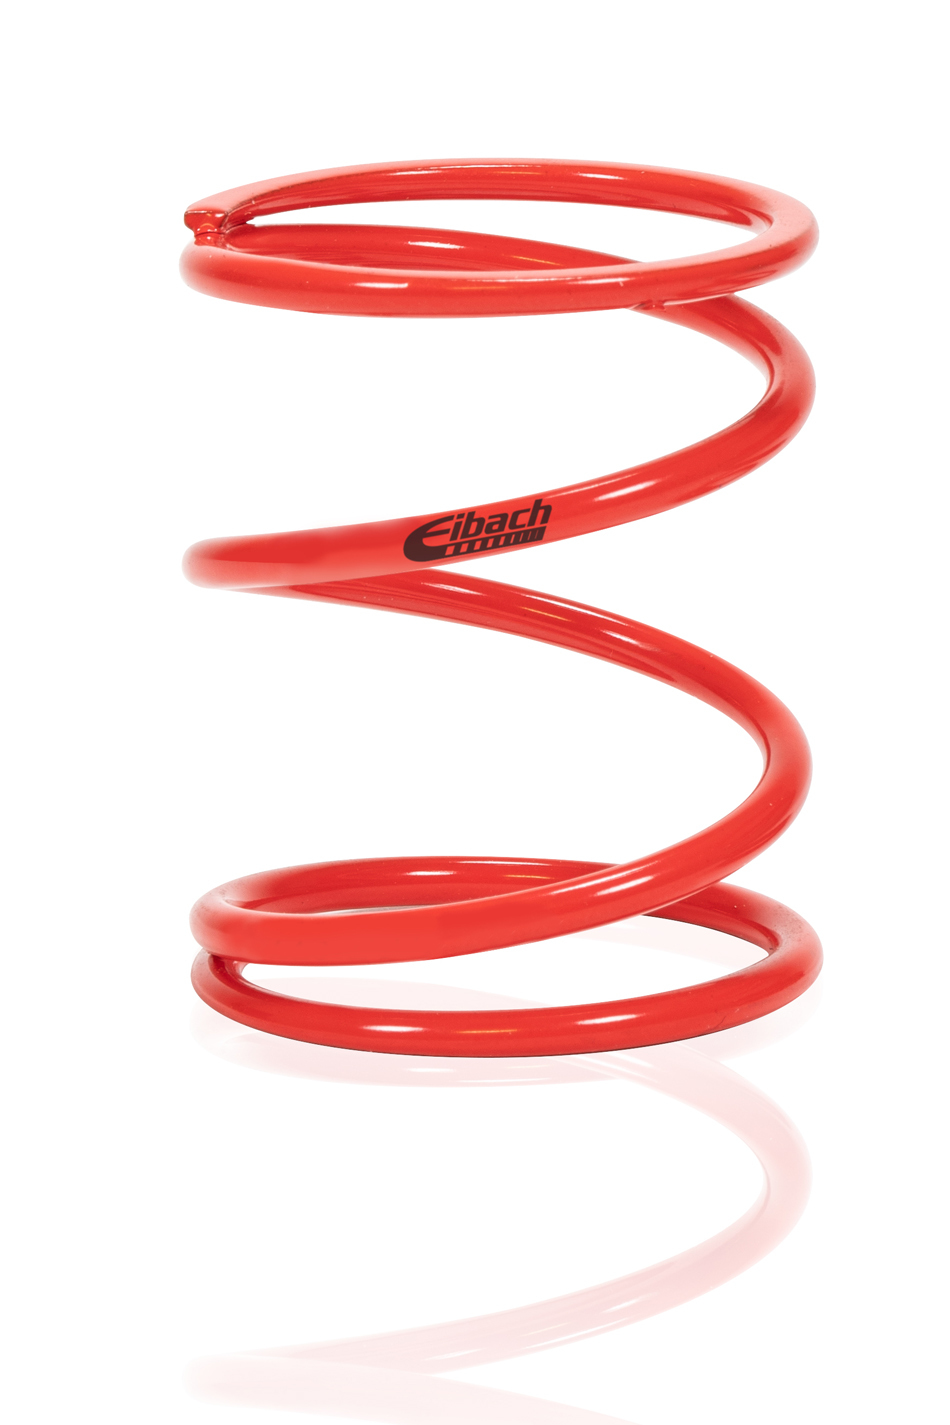 Eibach 0225.200.0150 Coil Spring, Barrel, Coil-Over, 1.360 in ID, 2.2500 in Length, 150 lb/in Spring Rate, Steel, Red Powder Coat, Each